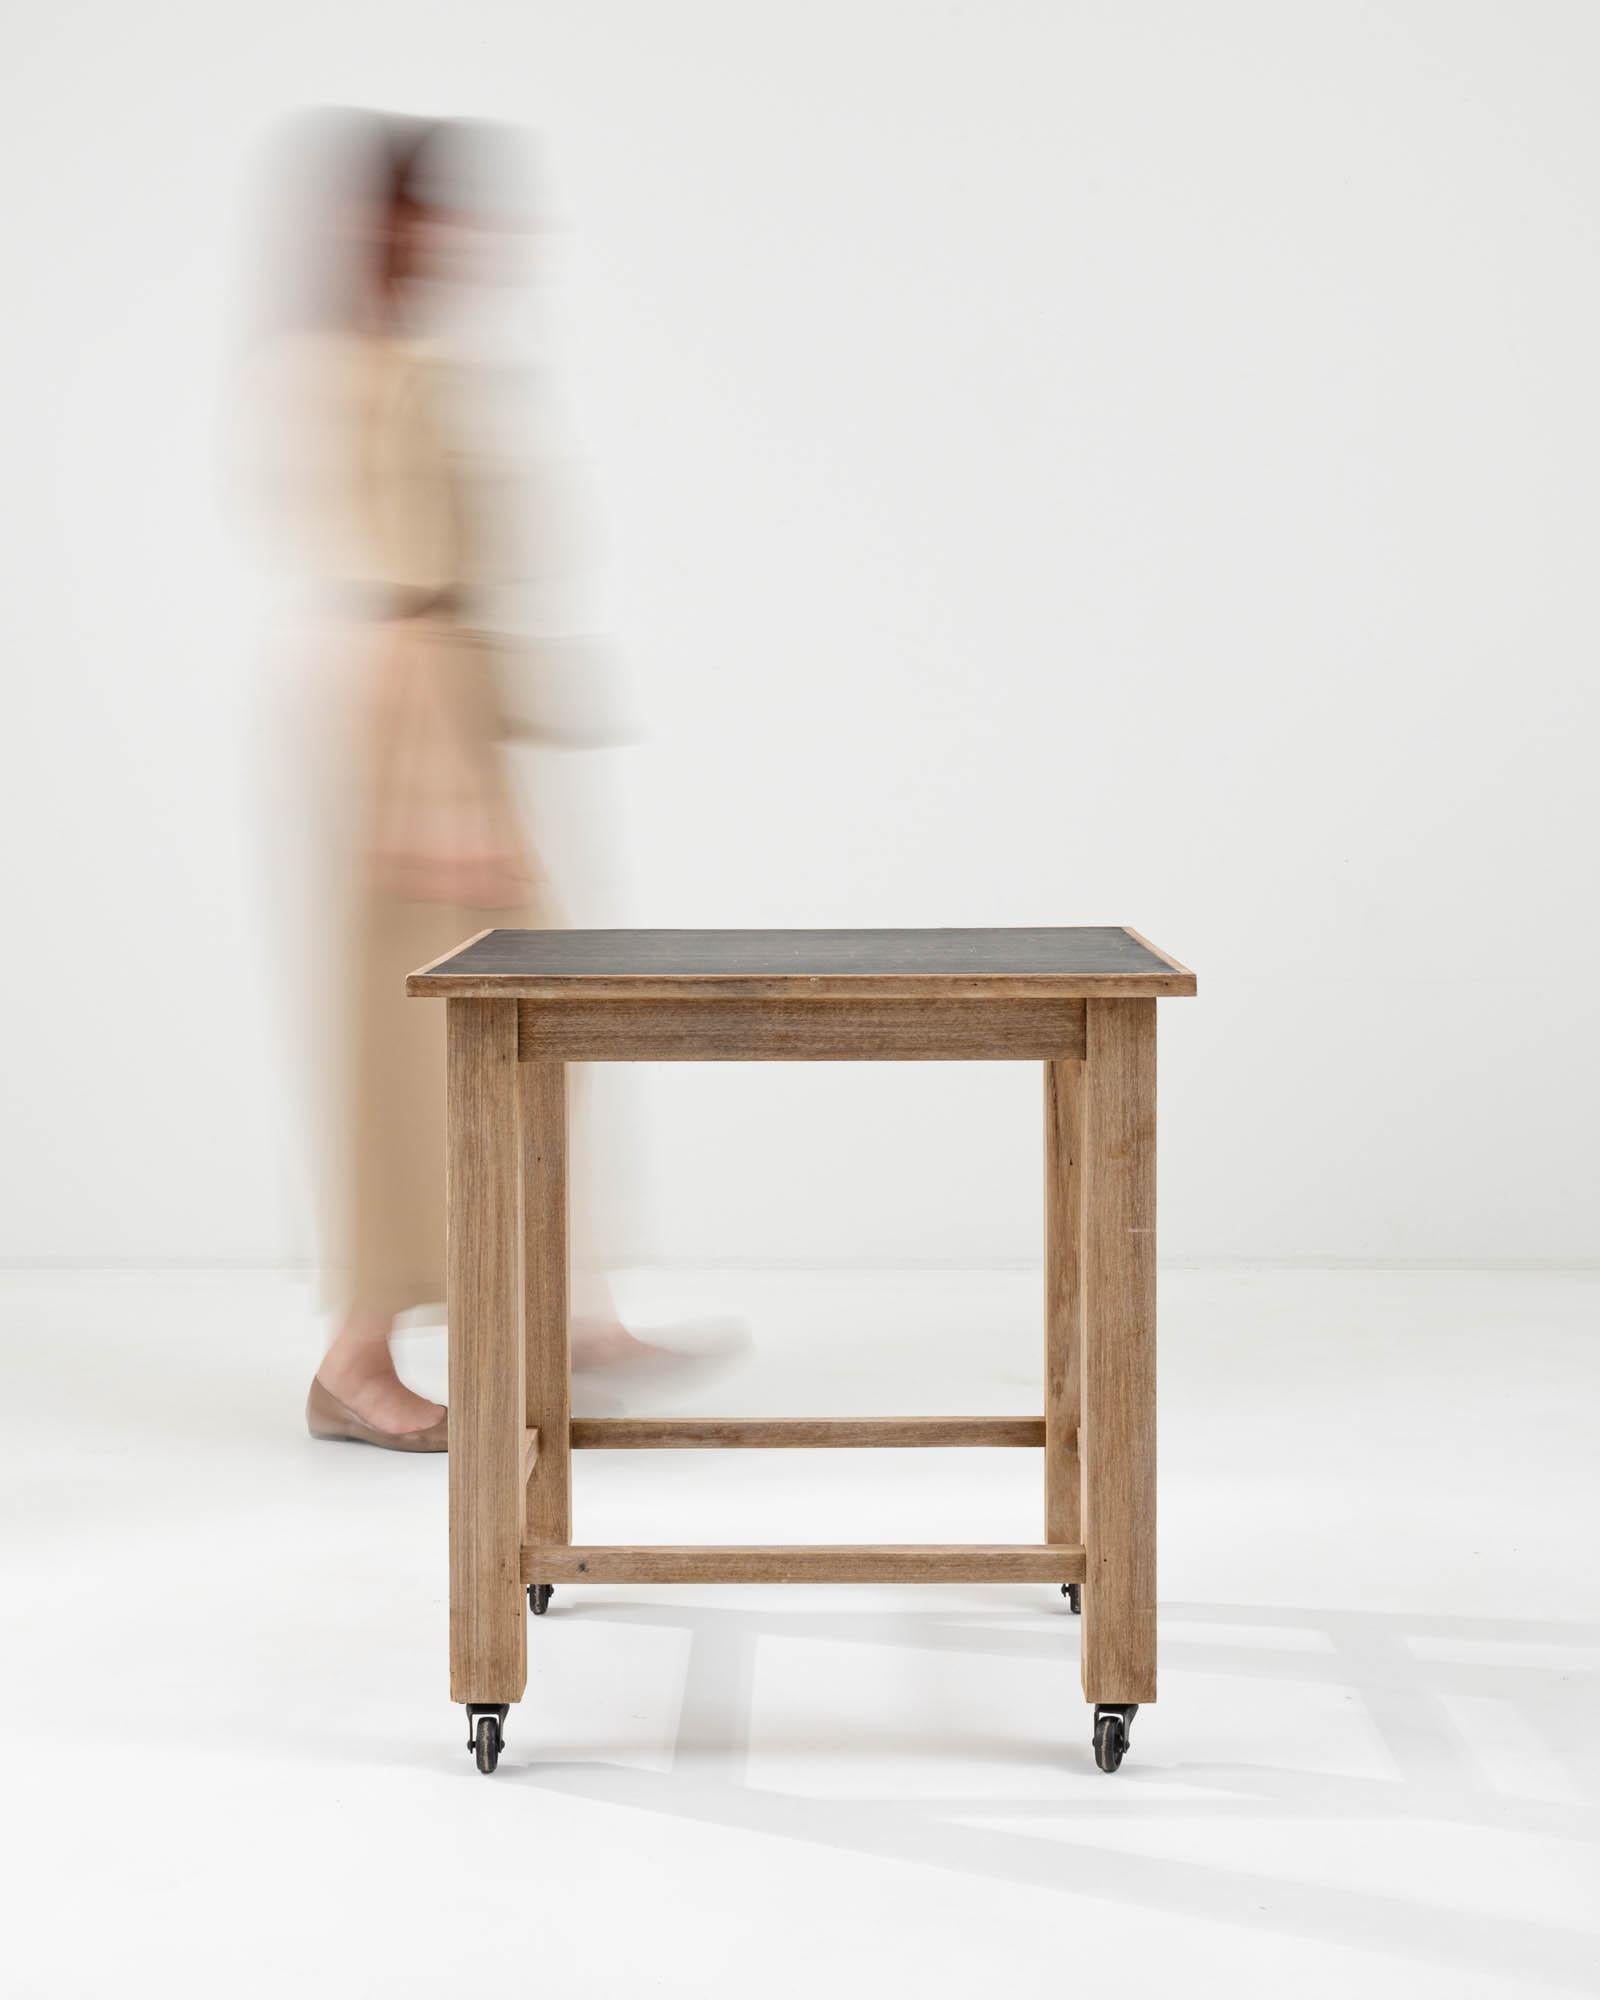 Elevate your space with the functional simplicity of this 20th Century Belgian Wooden Side Table on Wheels. Its light oak base provides a natural and inviting touch, while the dark black wooden top offers a striking contrast. The small, dark wheels